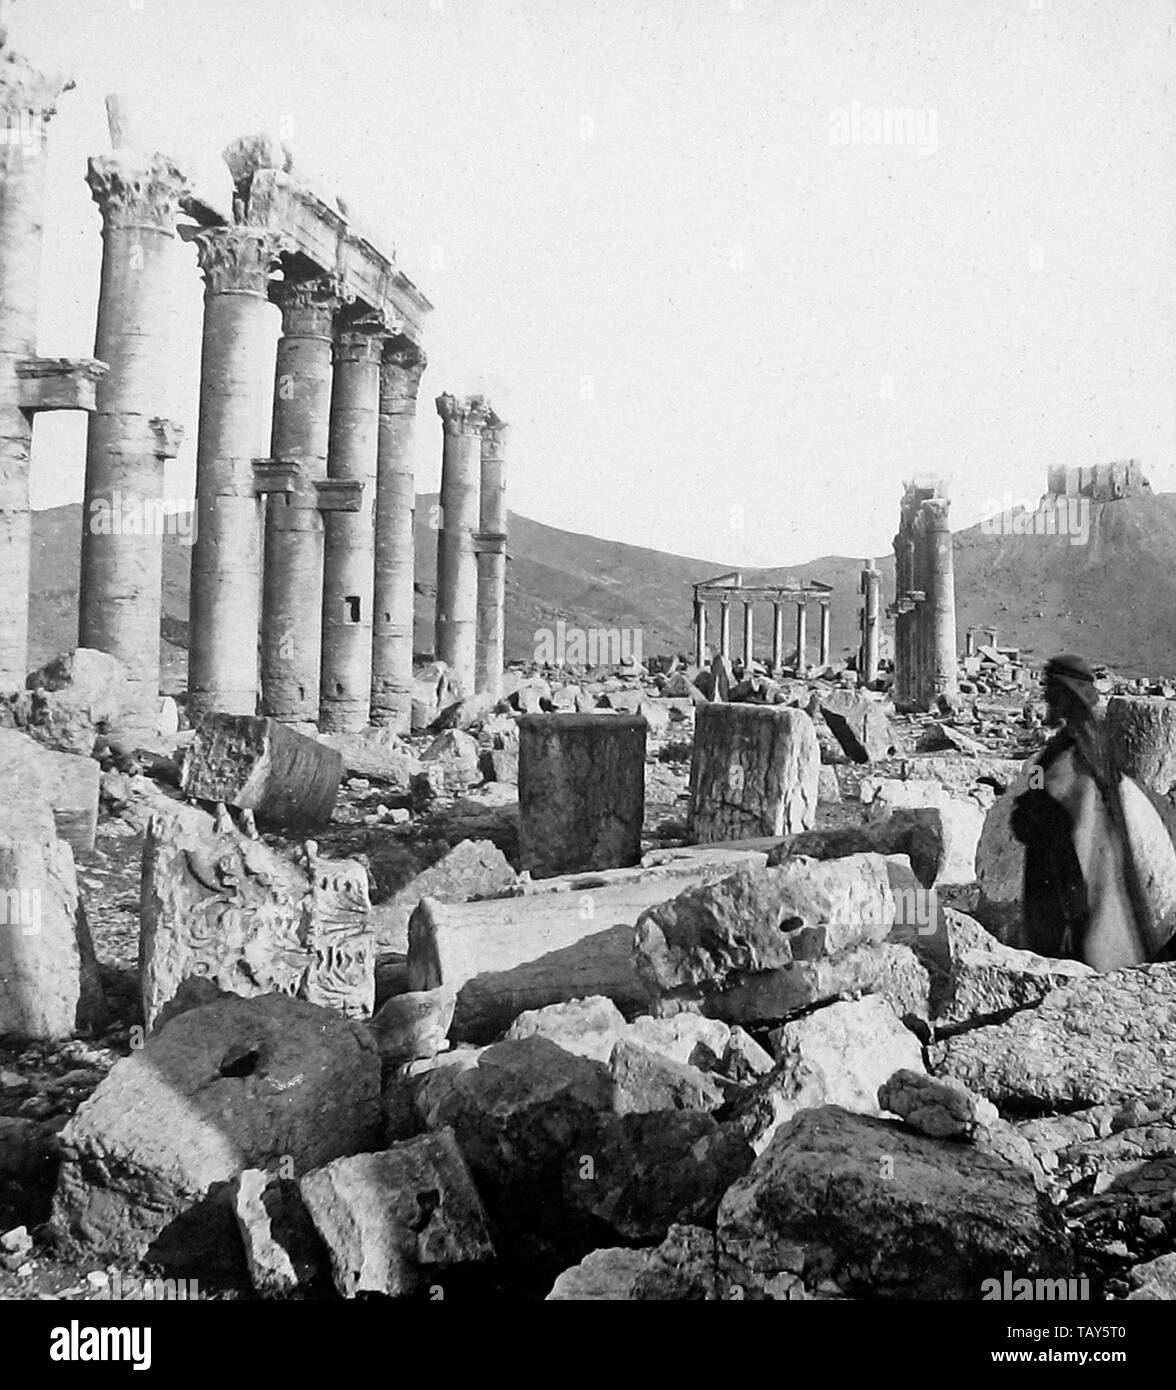 Palmyra, Syrie Banque D'Images